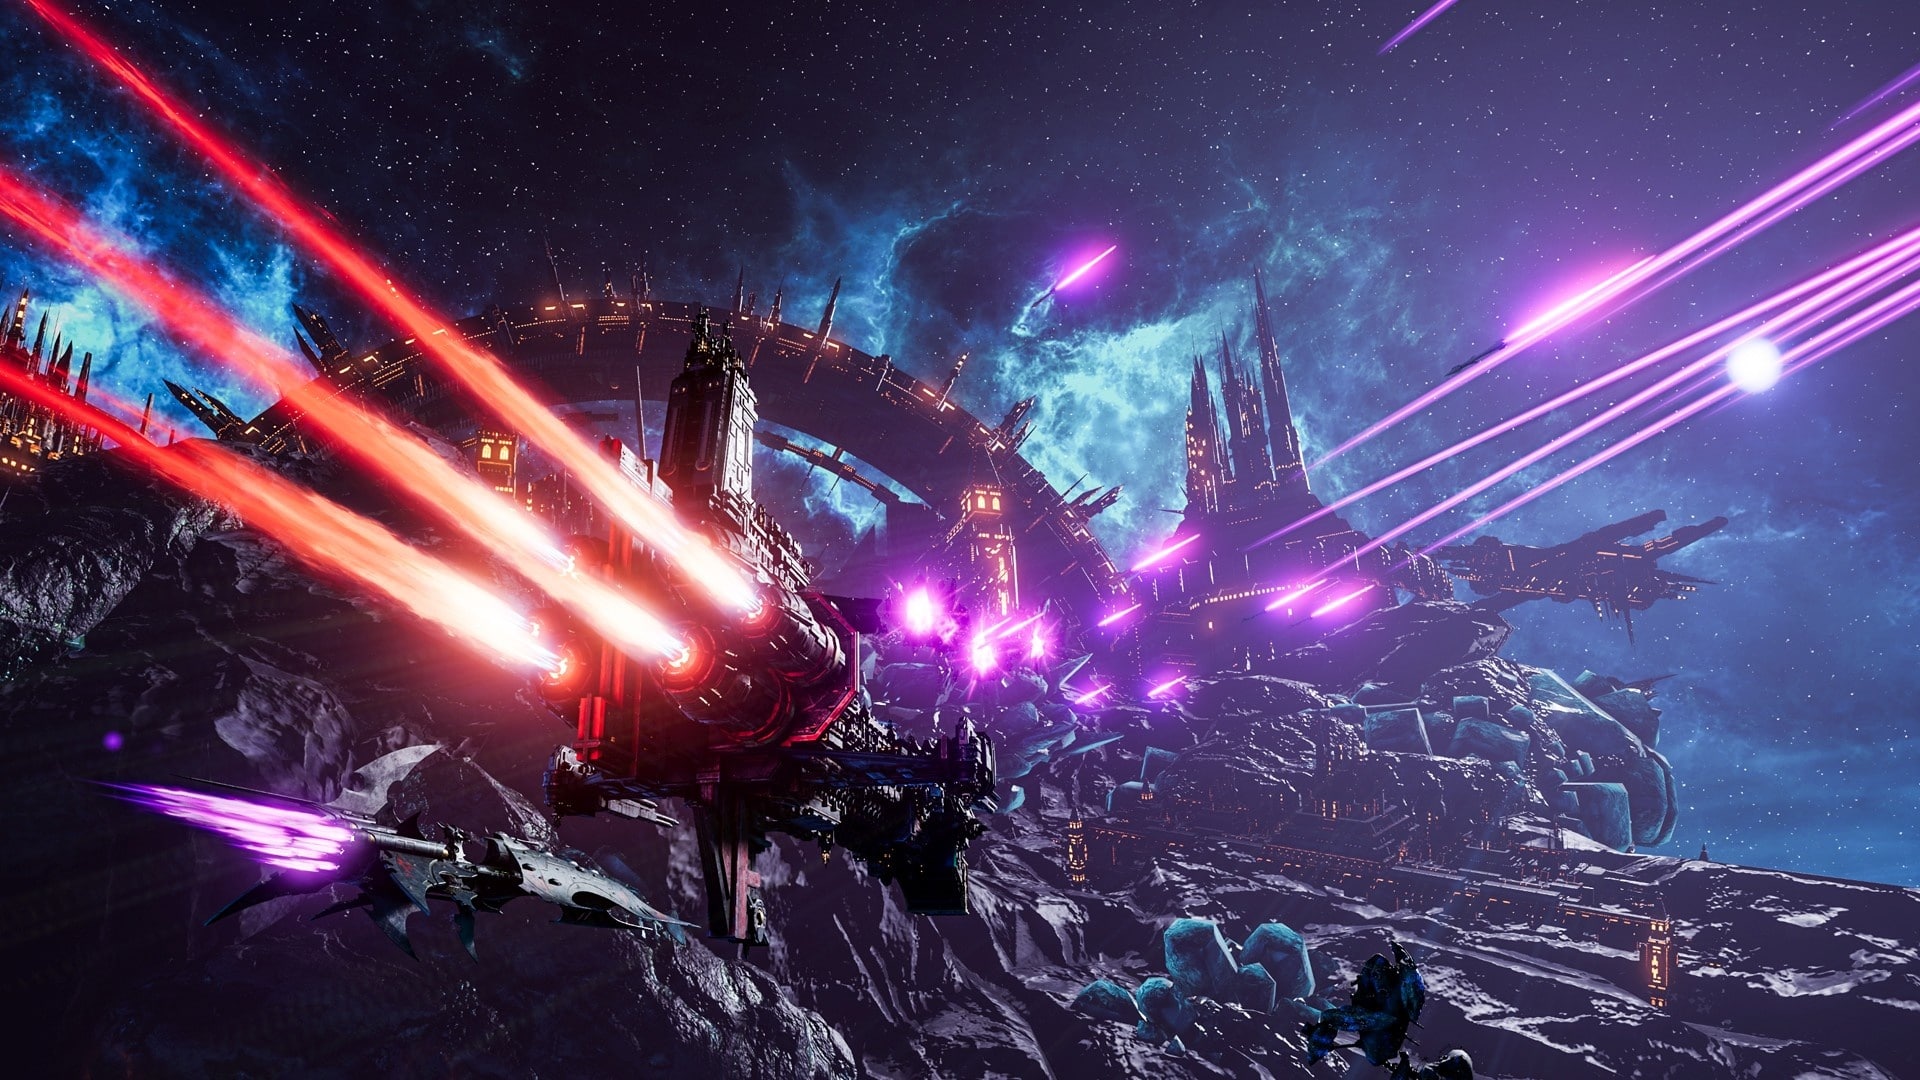 (Battlefleet Gothic: Armada 2 (2019) is where the action really gets going in space).